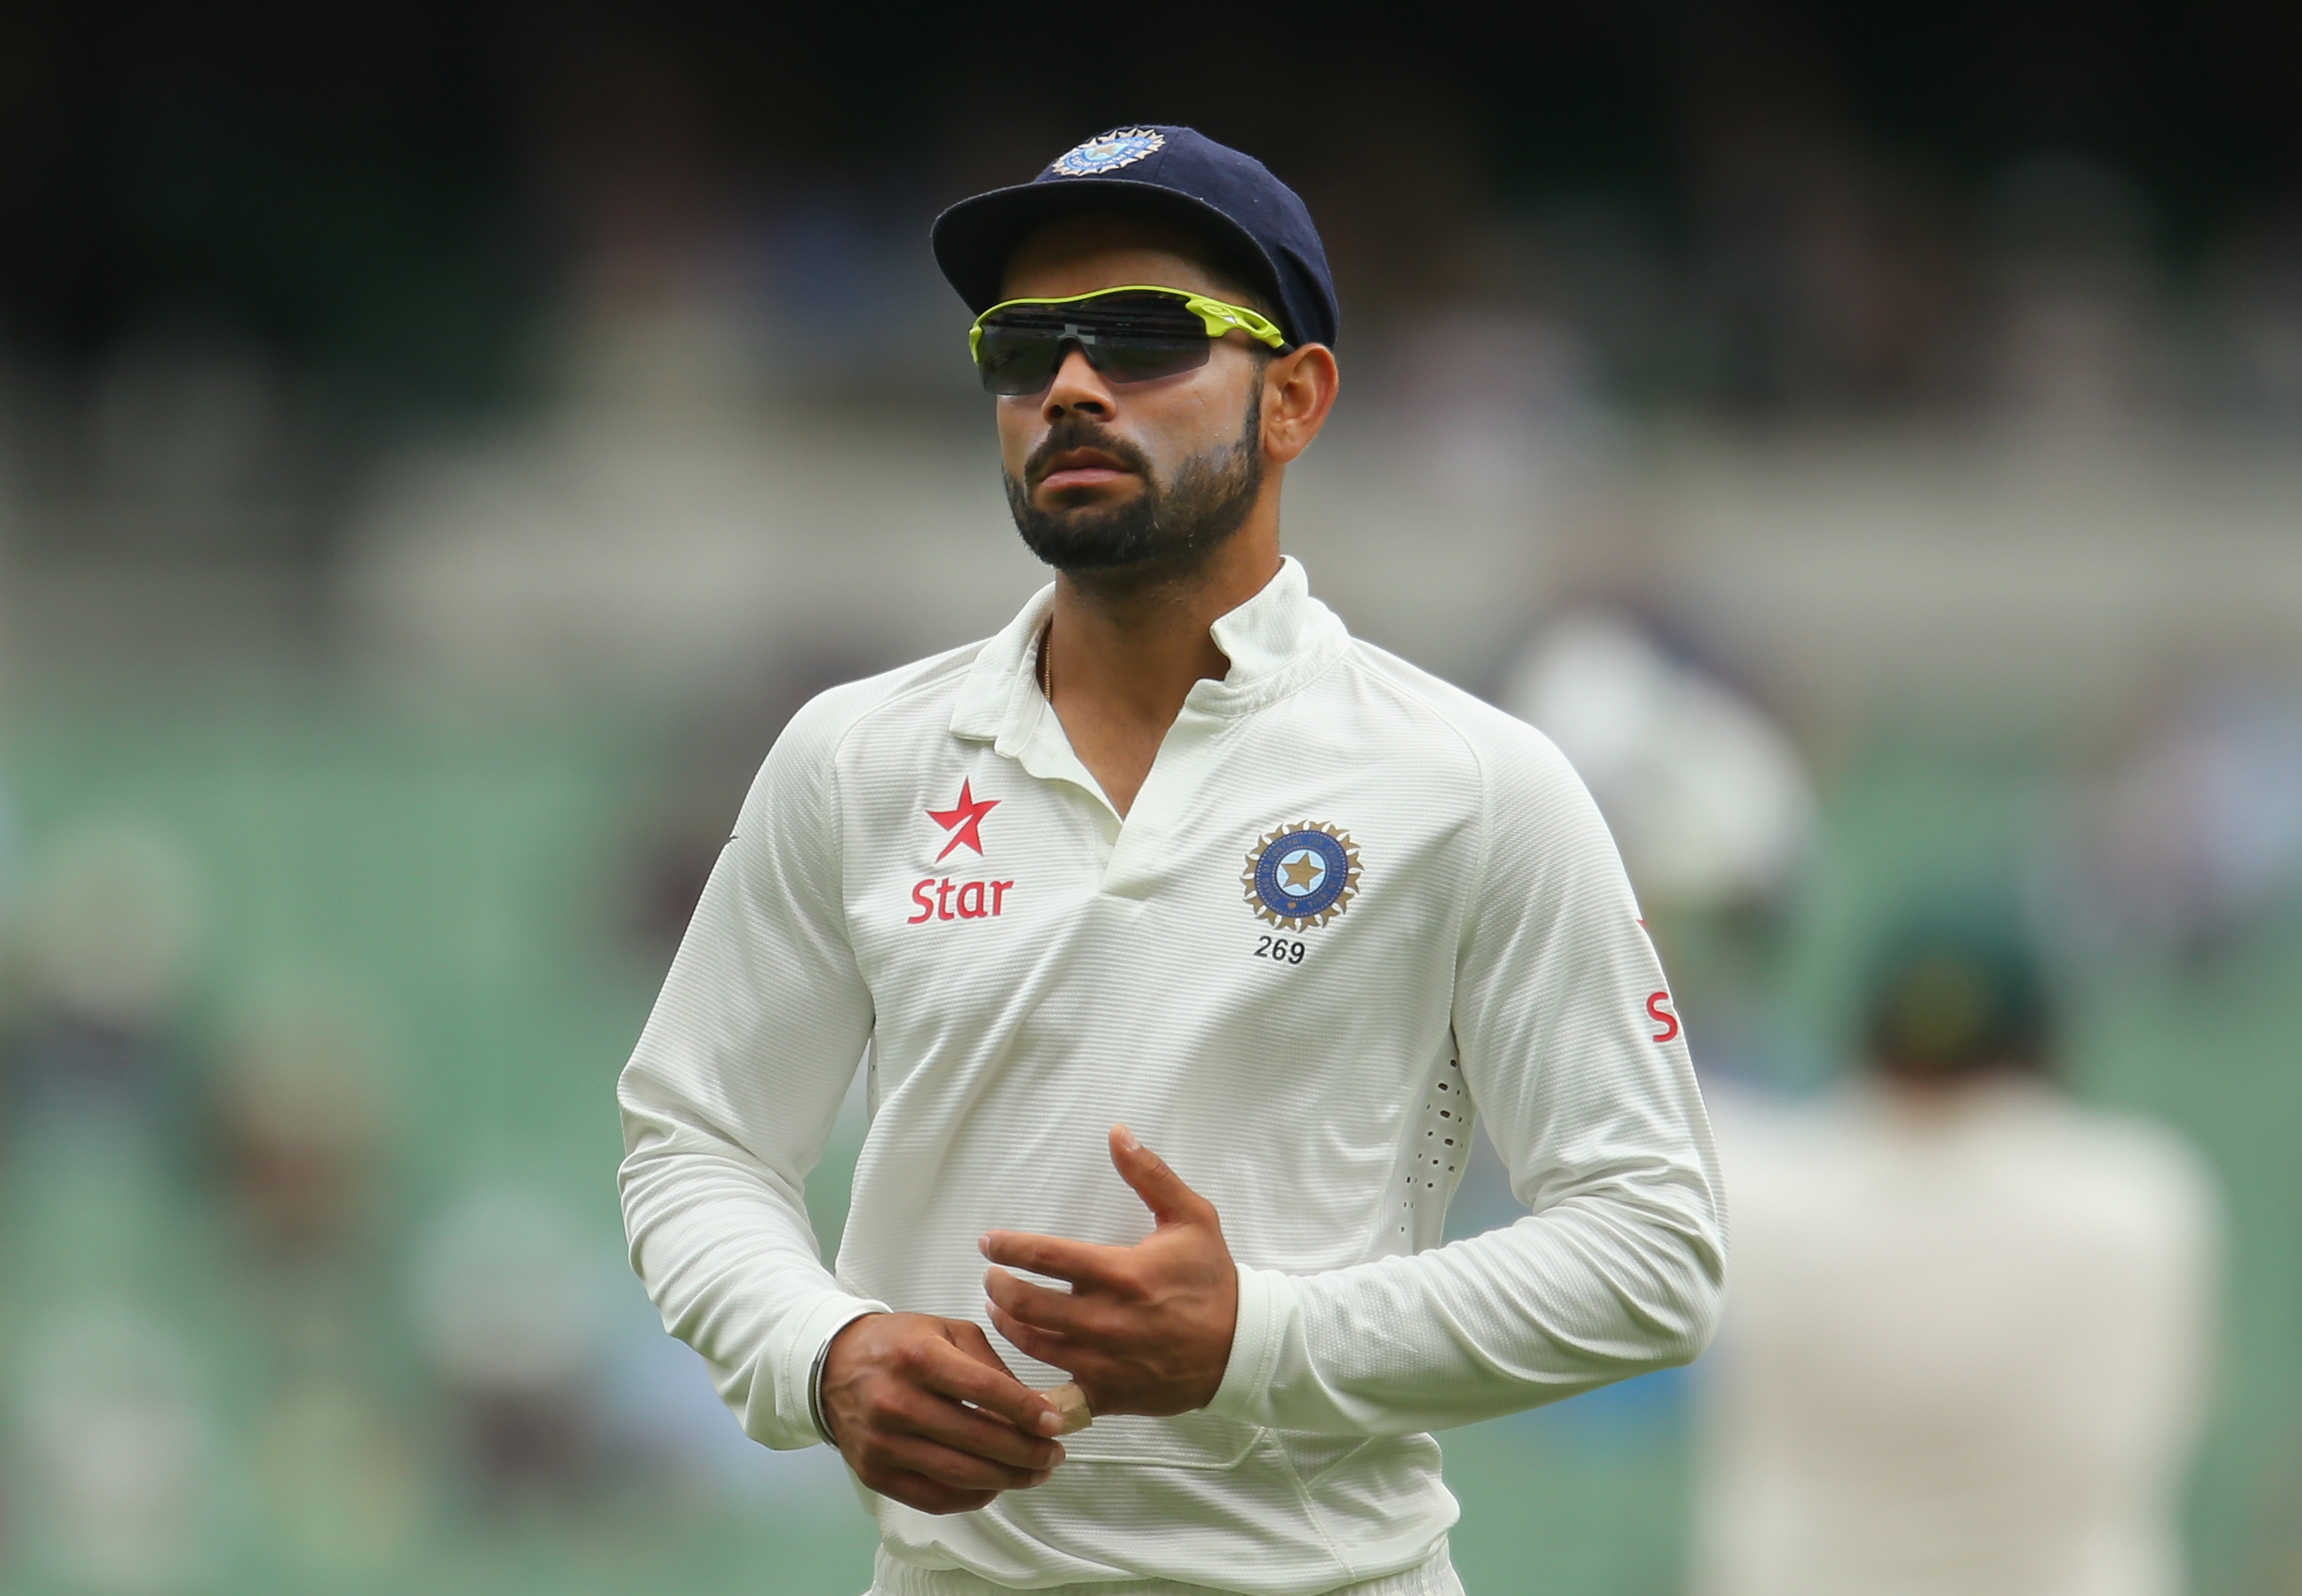 Theroar.com.au: Virat Kohli was right in declaring against England, Steve Smith failed at the exact same thing